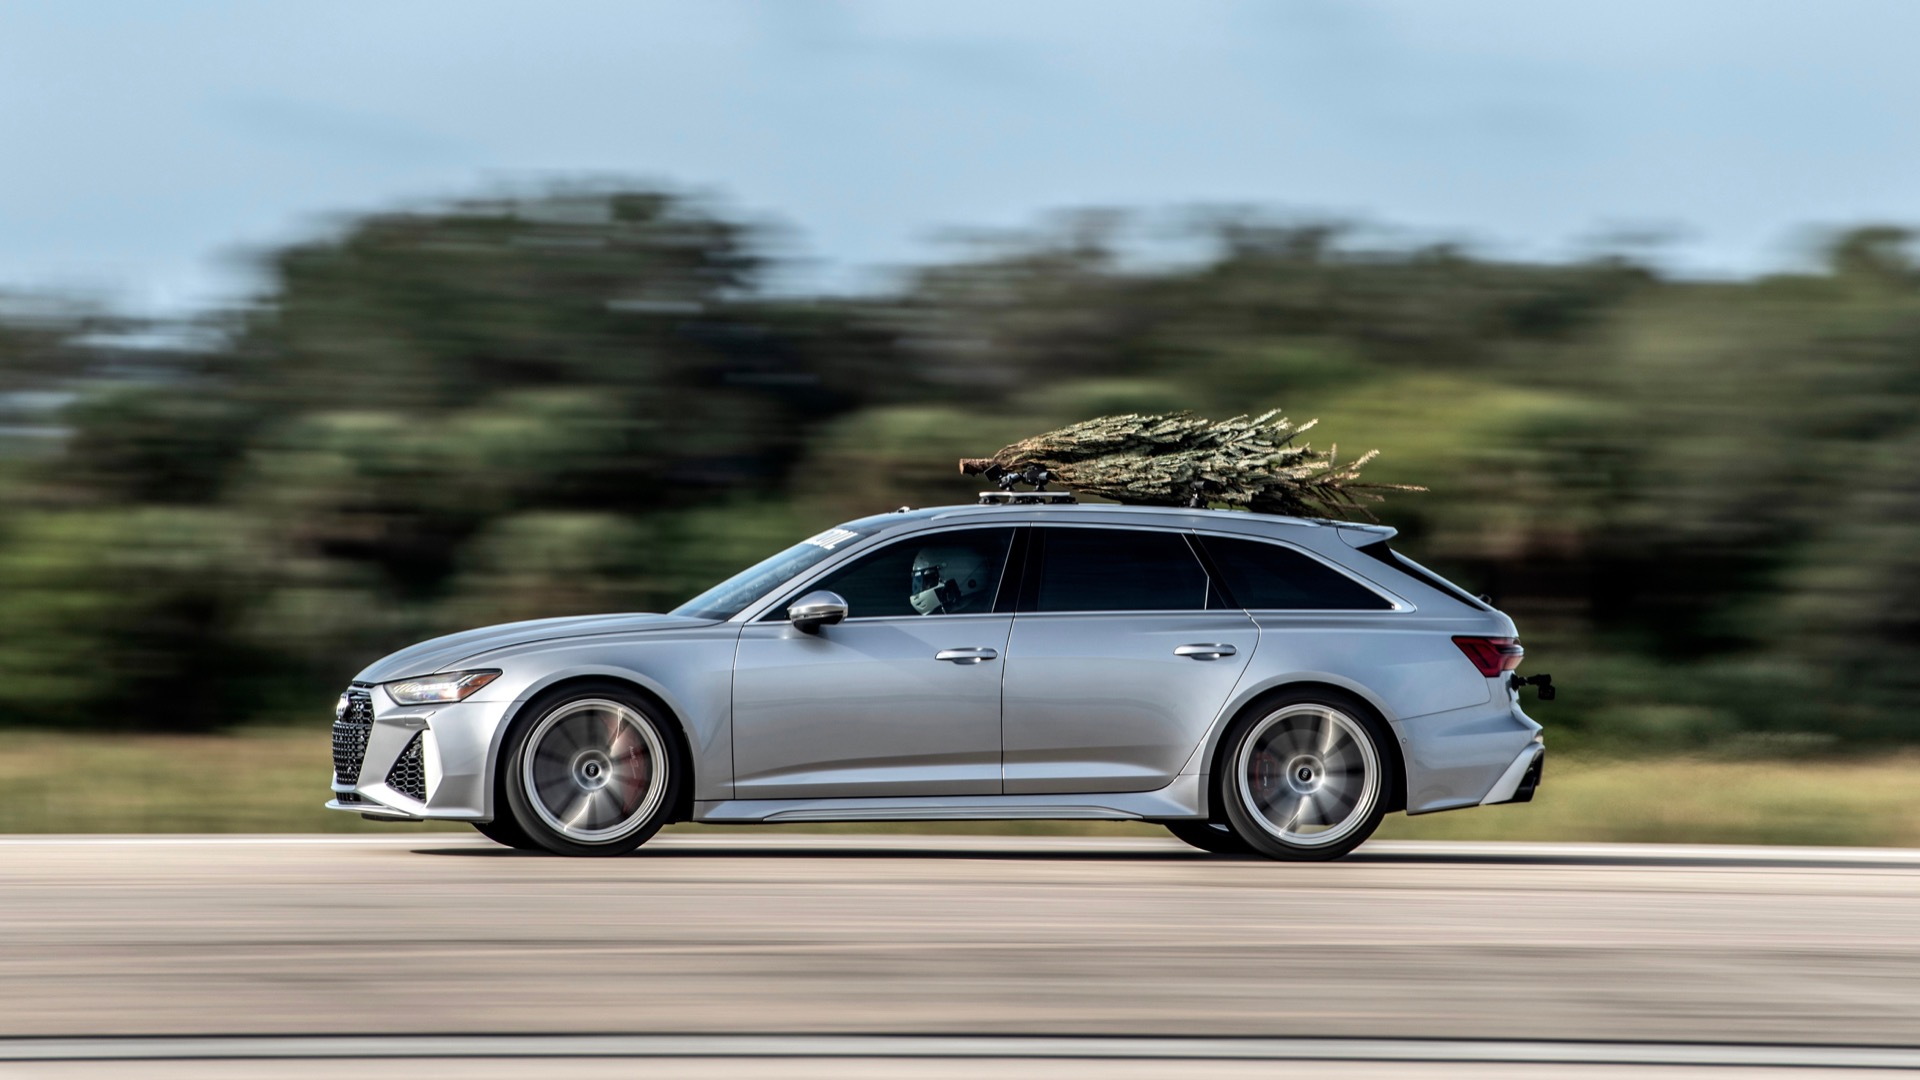 Christmas tree reaches 183 mph strapped to a Hennessey-tuned Audi RS 6 Avant